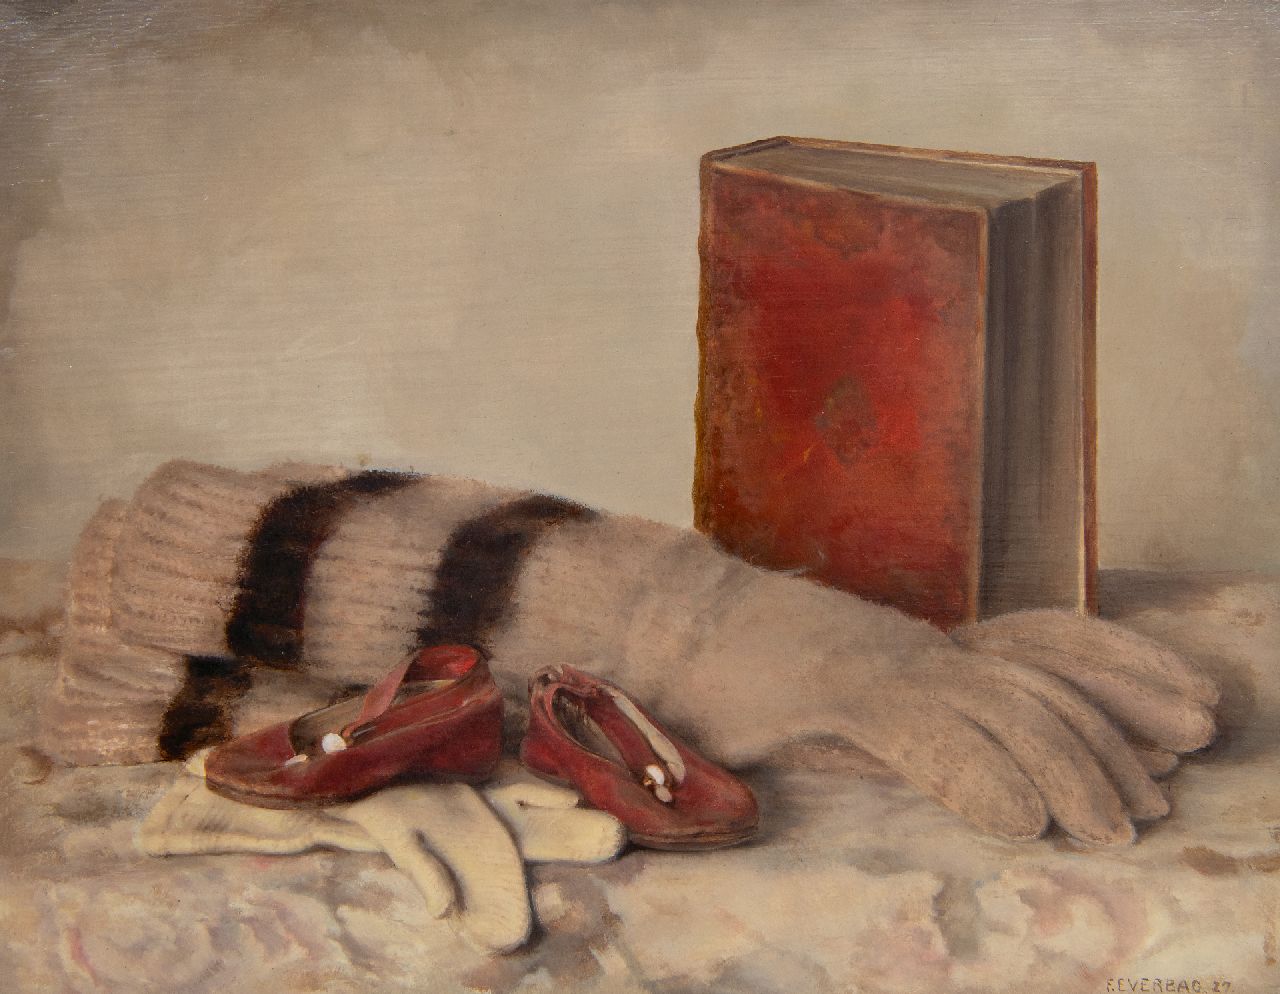 Everbag F.  | Franciscus 'Frans' Everbag | Paintings offered for sale | Still life with gloves, a book and children's shoes, oil on panel 21.0 x 26.9 cm, signed l.r. and dated '27